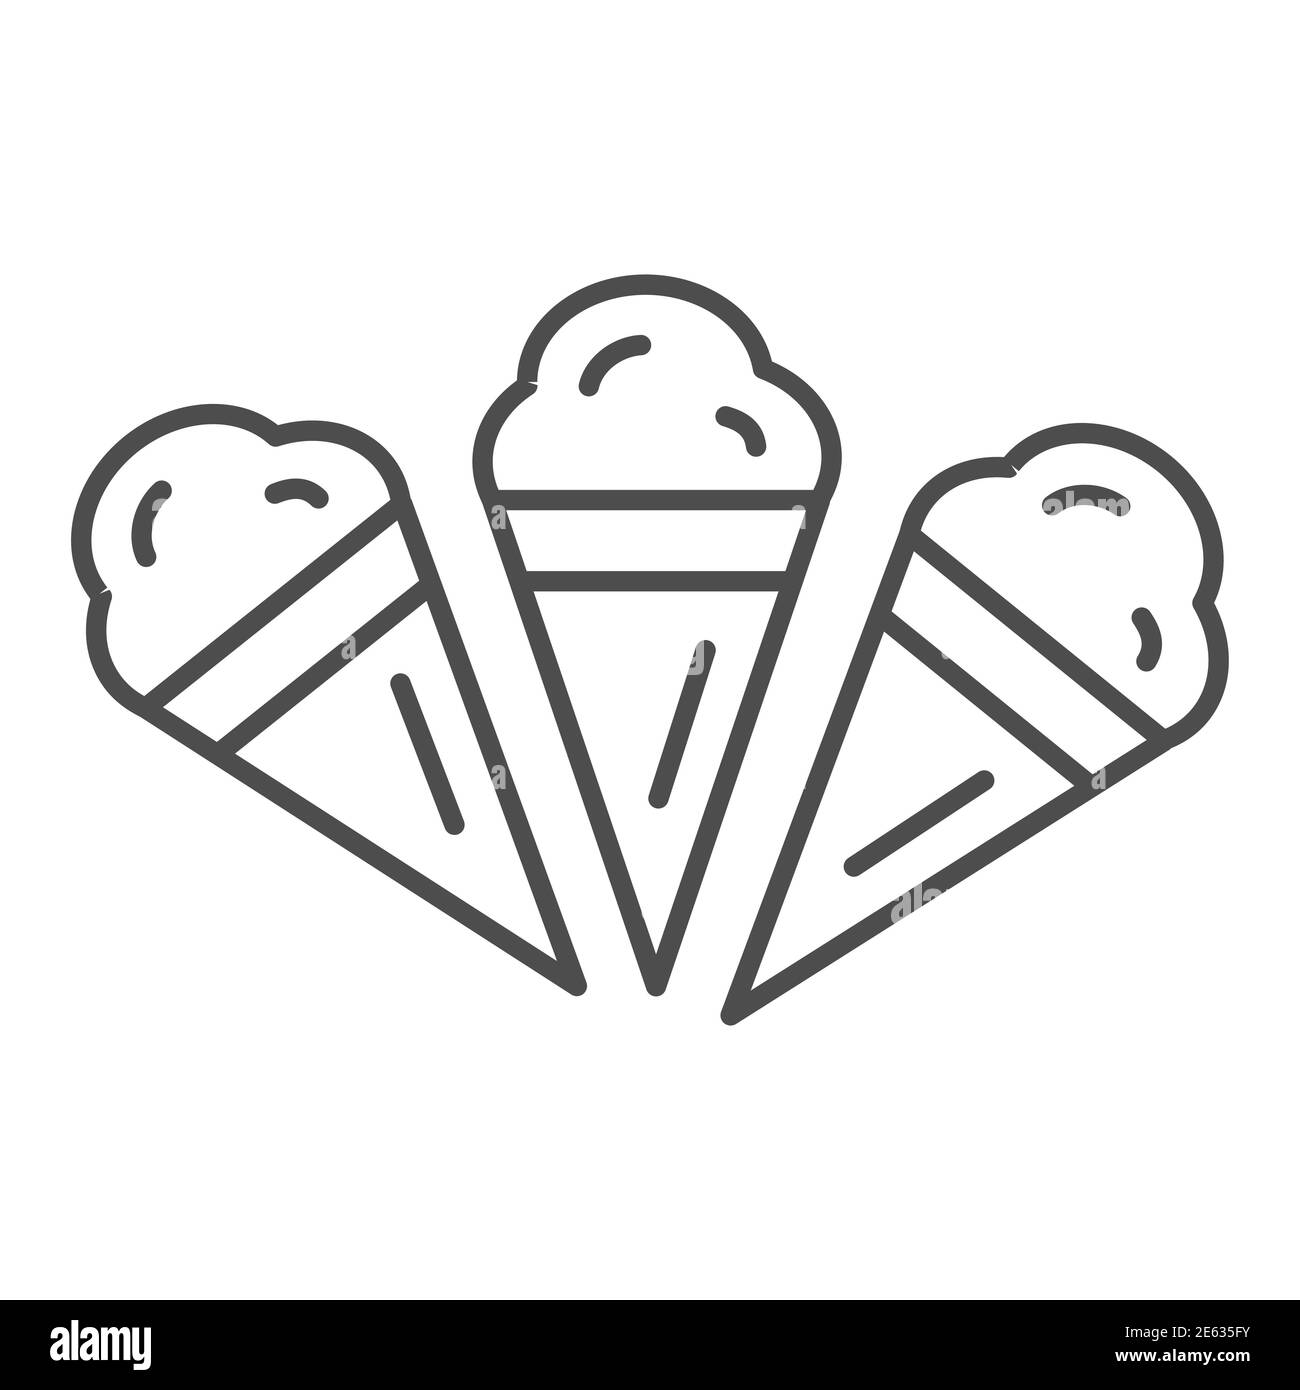 Three ice creams thin line icon, Summer concept, Set of ice cream cones sign on white background, Ice-cream icon in outline style for mobile concept Stock Vector